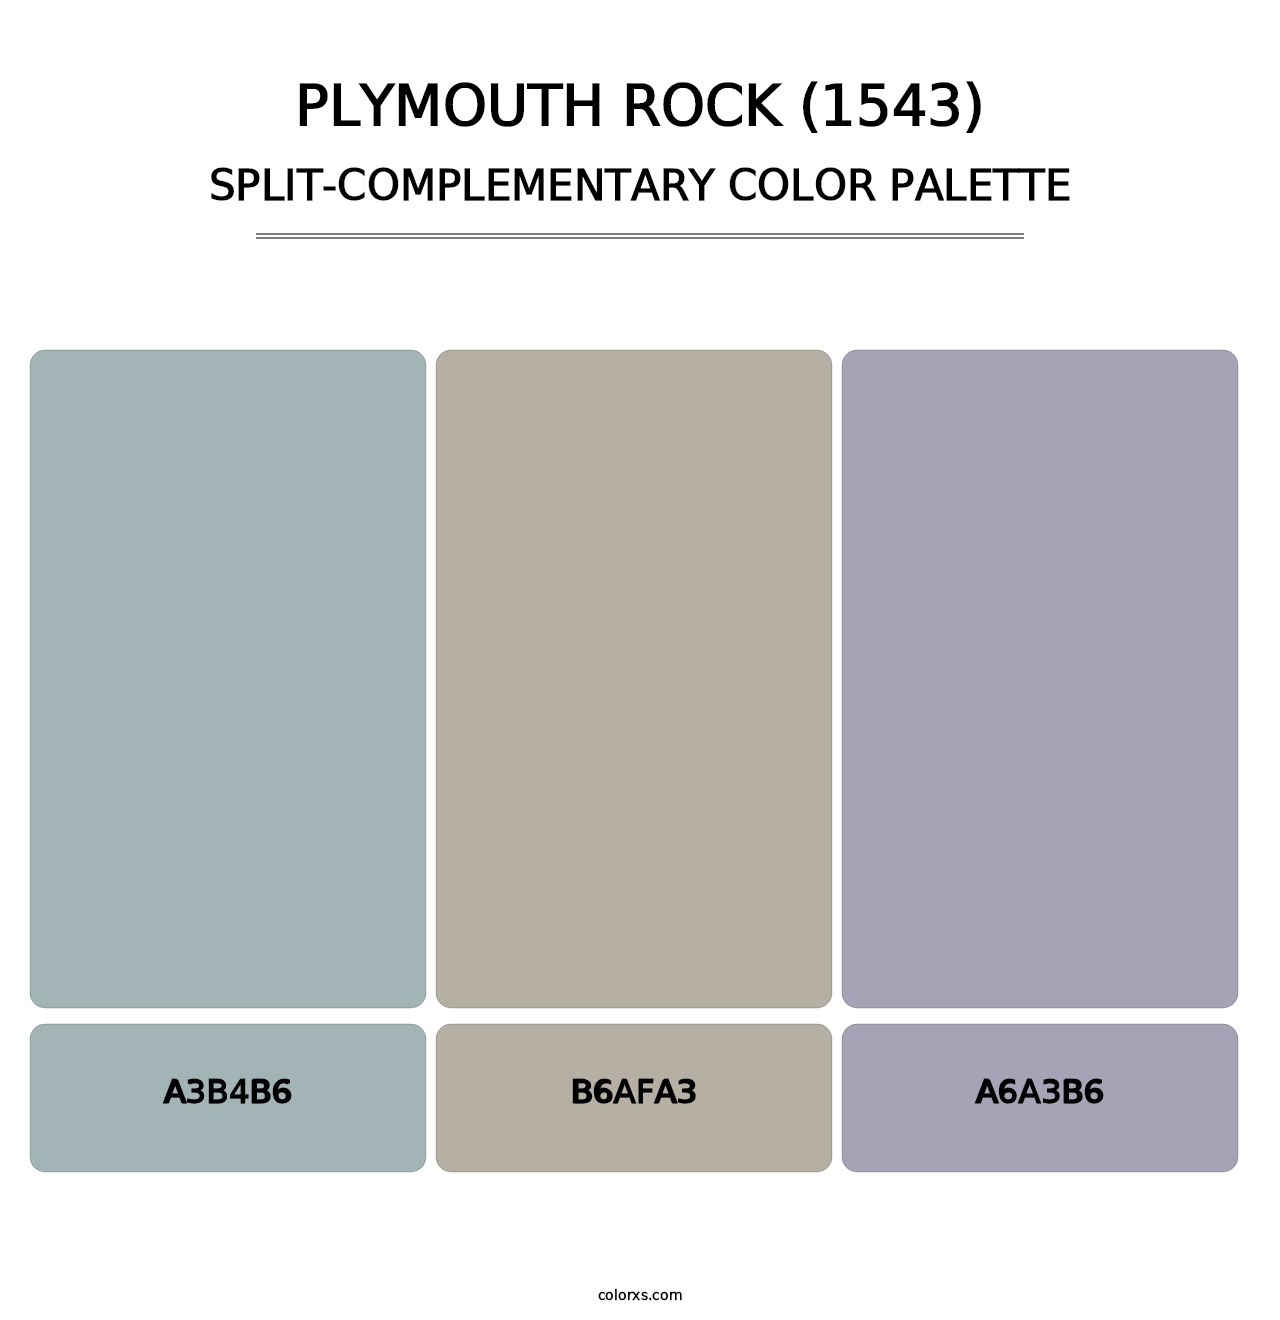 Plymouth Rock (1543) - Split-Complementary Color Palette